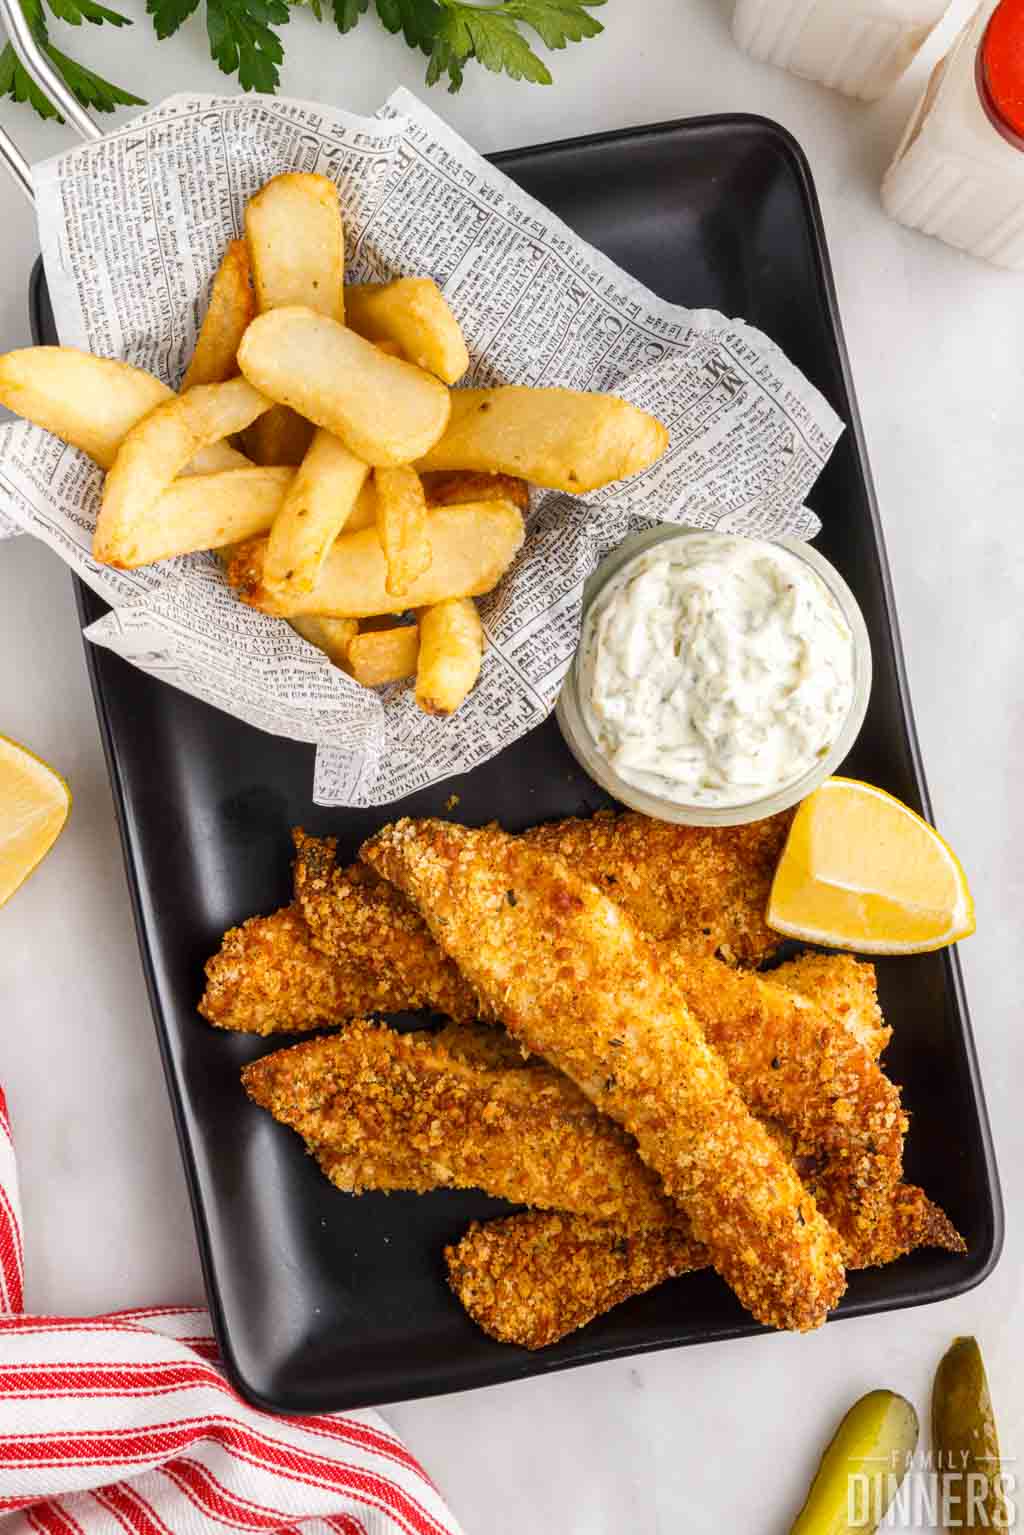 fried fish with fries, tartar sauce and a lemon wedge